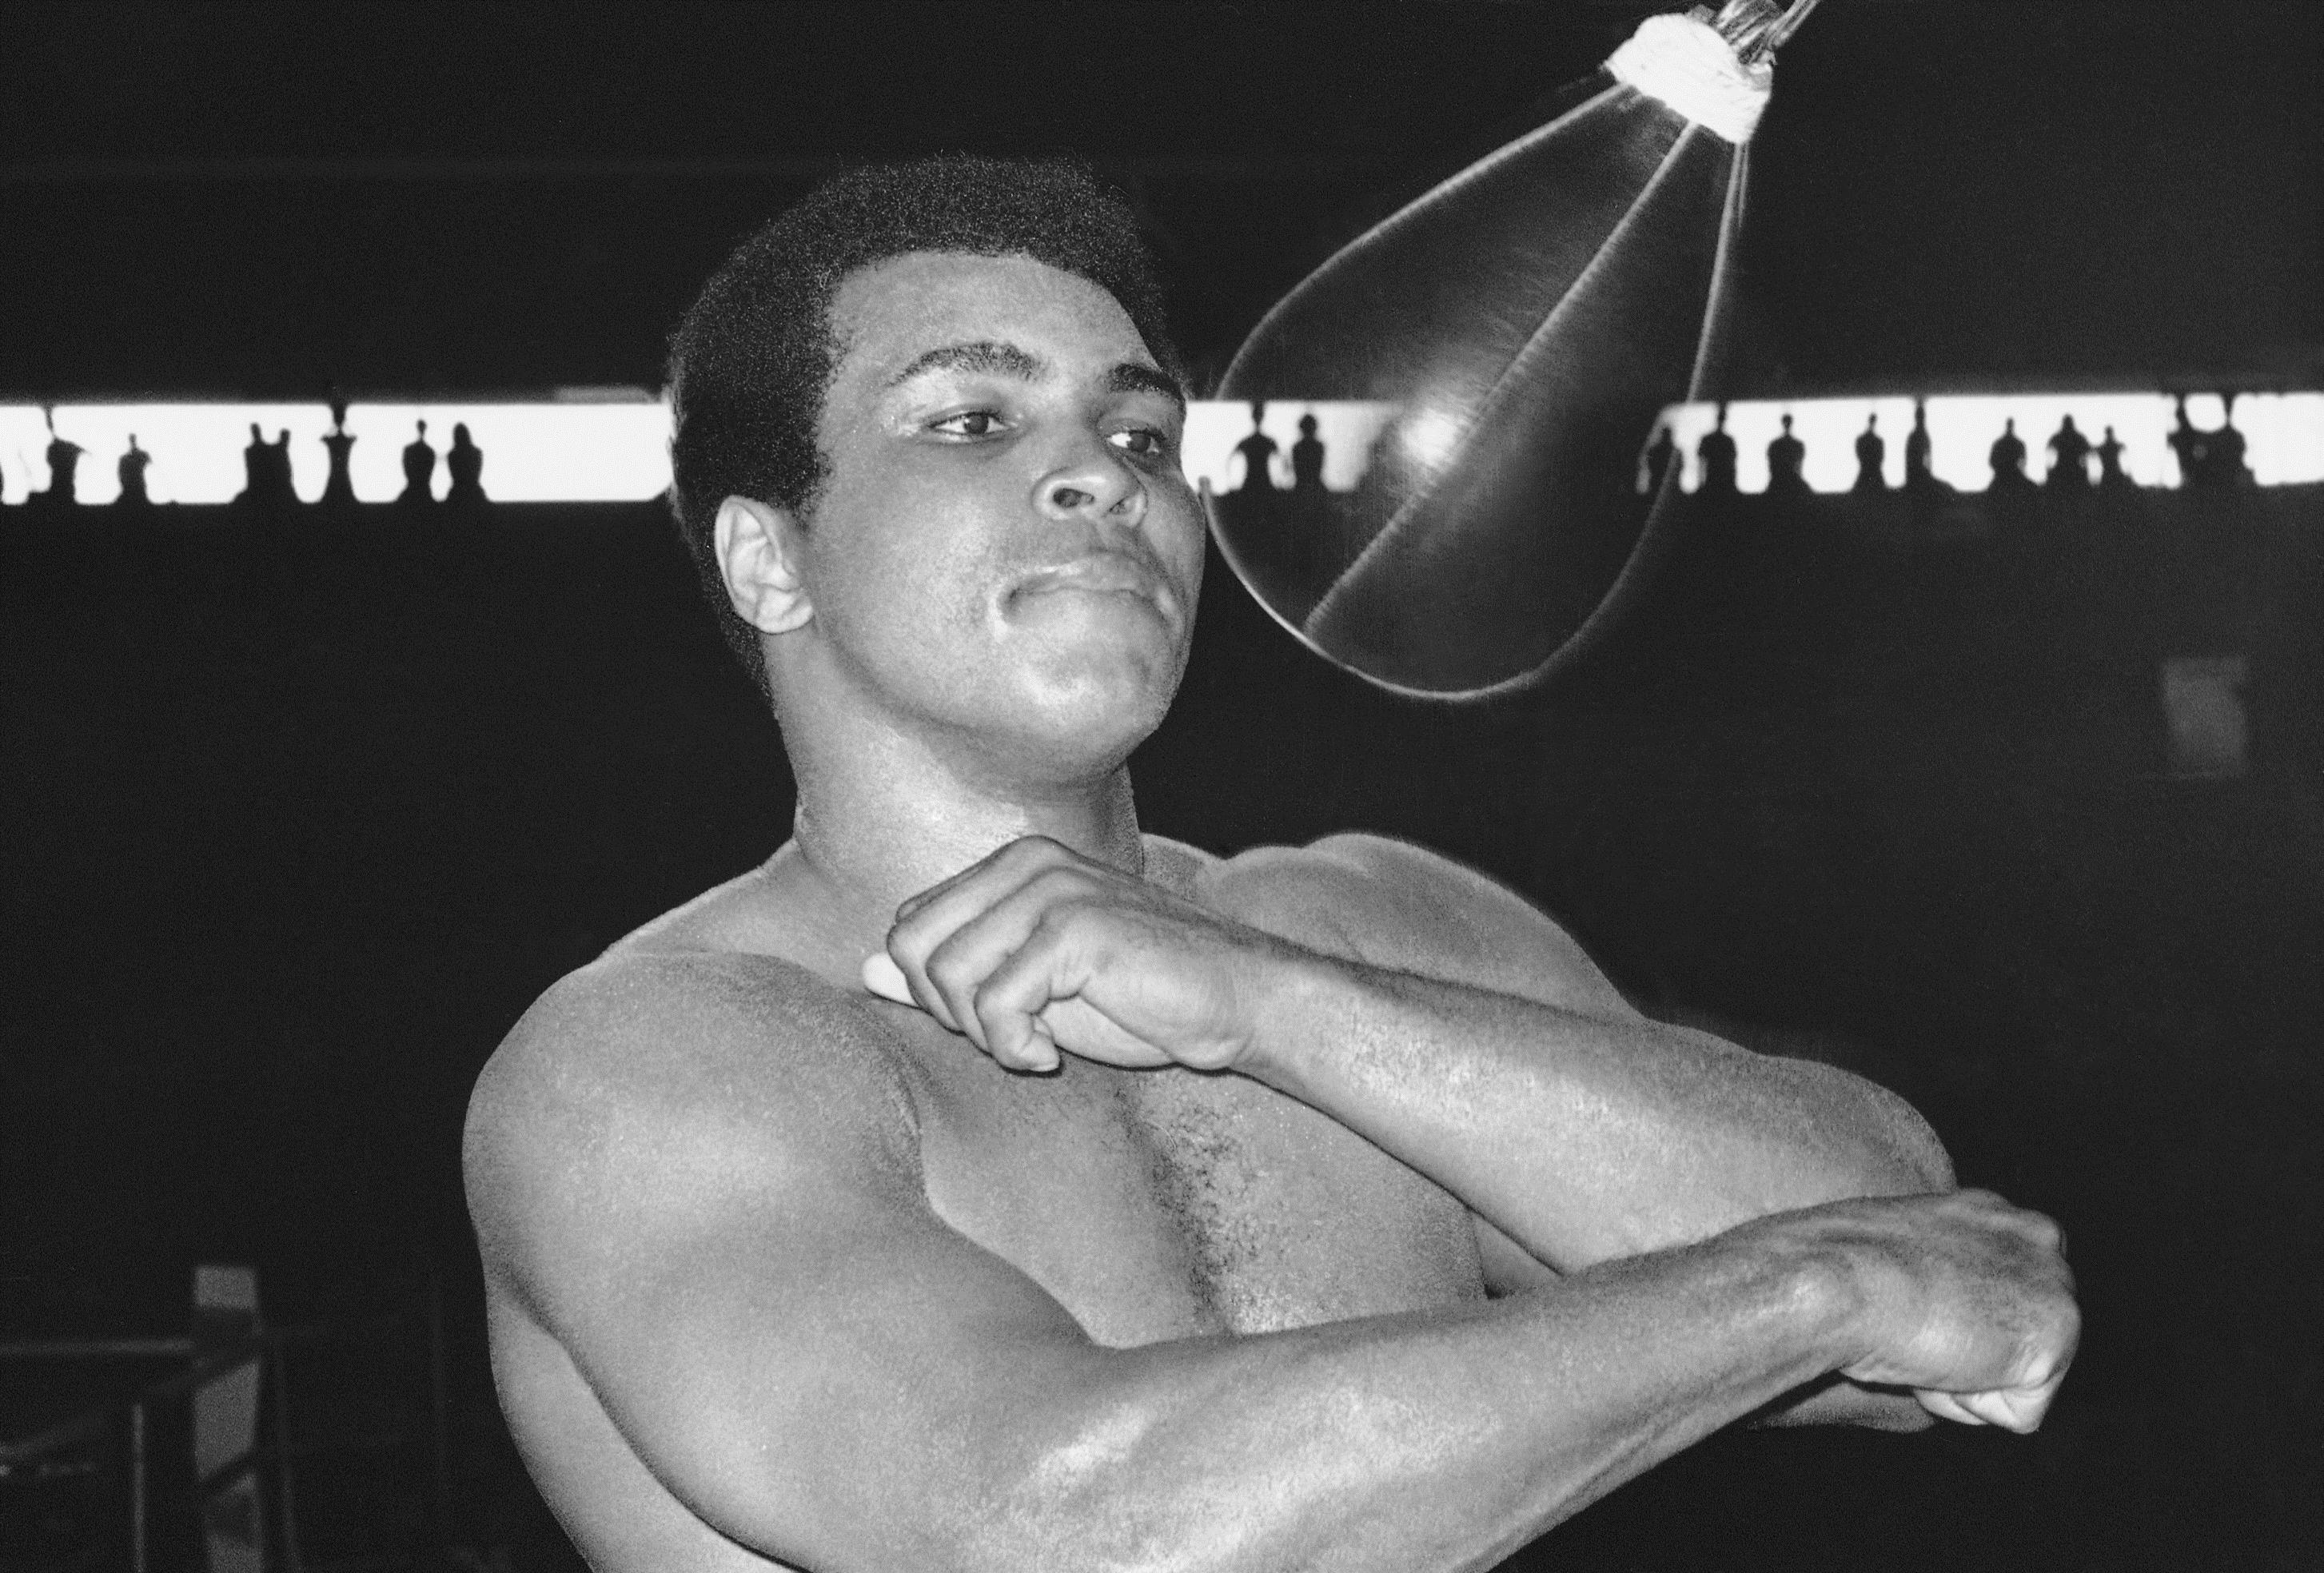 Muhammad Ali punches a speed bag at the Folk Art Center in Manila, Philippines in this Sept. 29, 1975, file photo. When Ali wasn't jabbing or dancing in the ring, he sometimes dabbled as an artist. (AP Photo/Jess Tan)